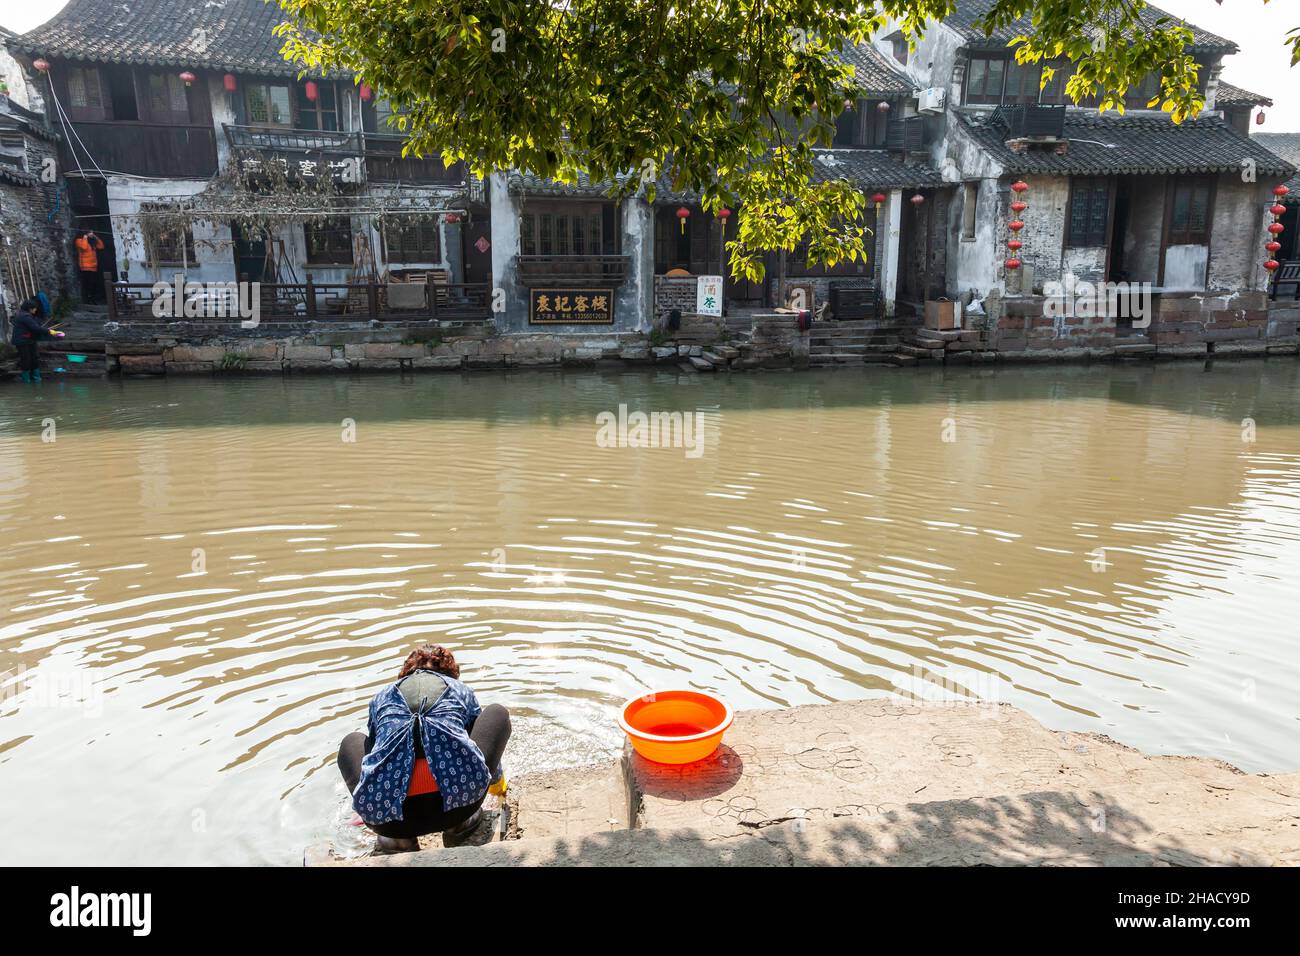 Woman washing her clothes in a canal in the water village of Xitang, China Stock Photo